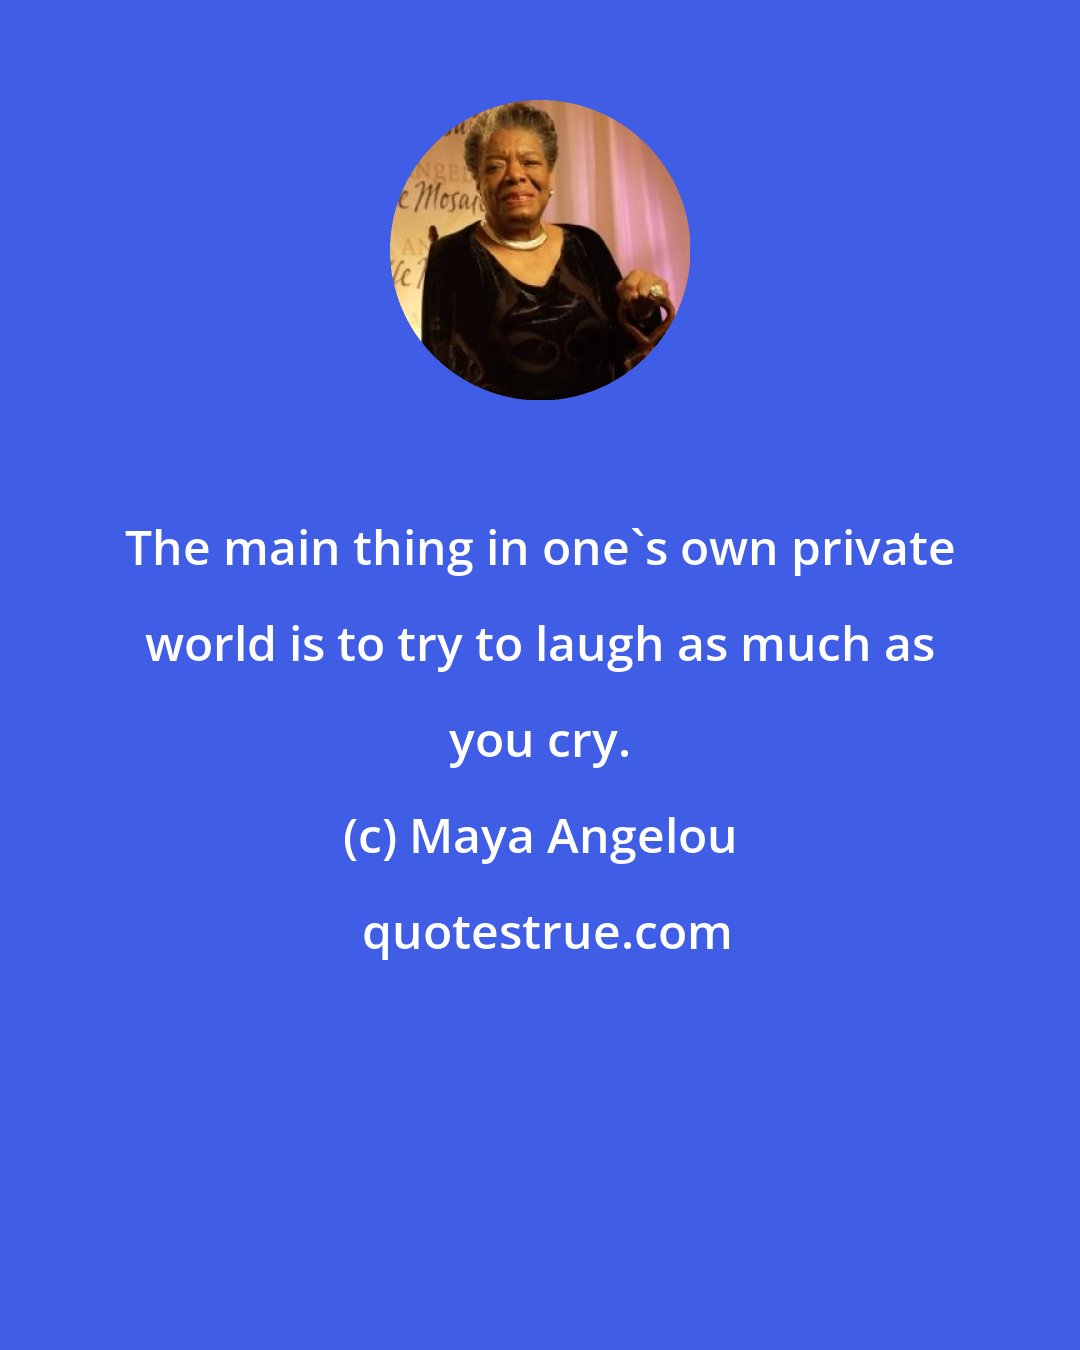 Maya Angelou: The main thing in one's own private world is to try to laugh as much as you cry.